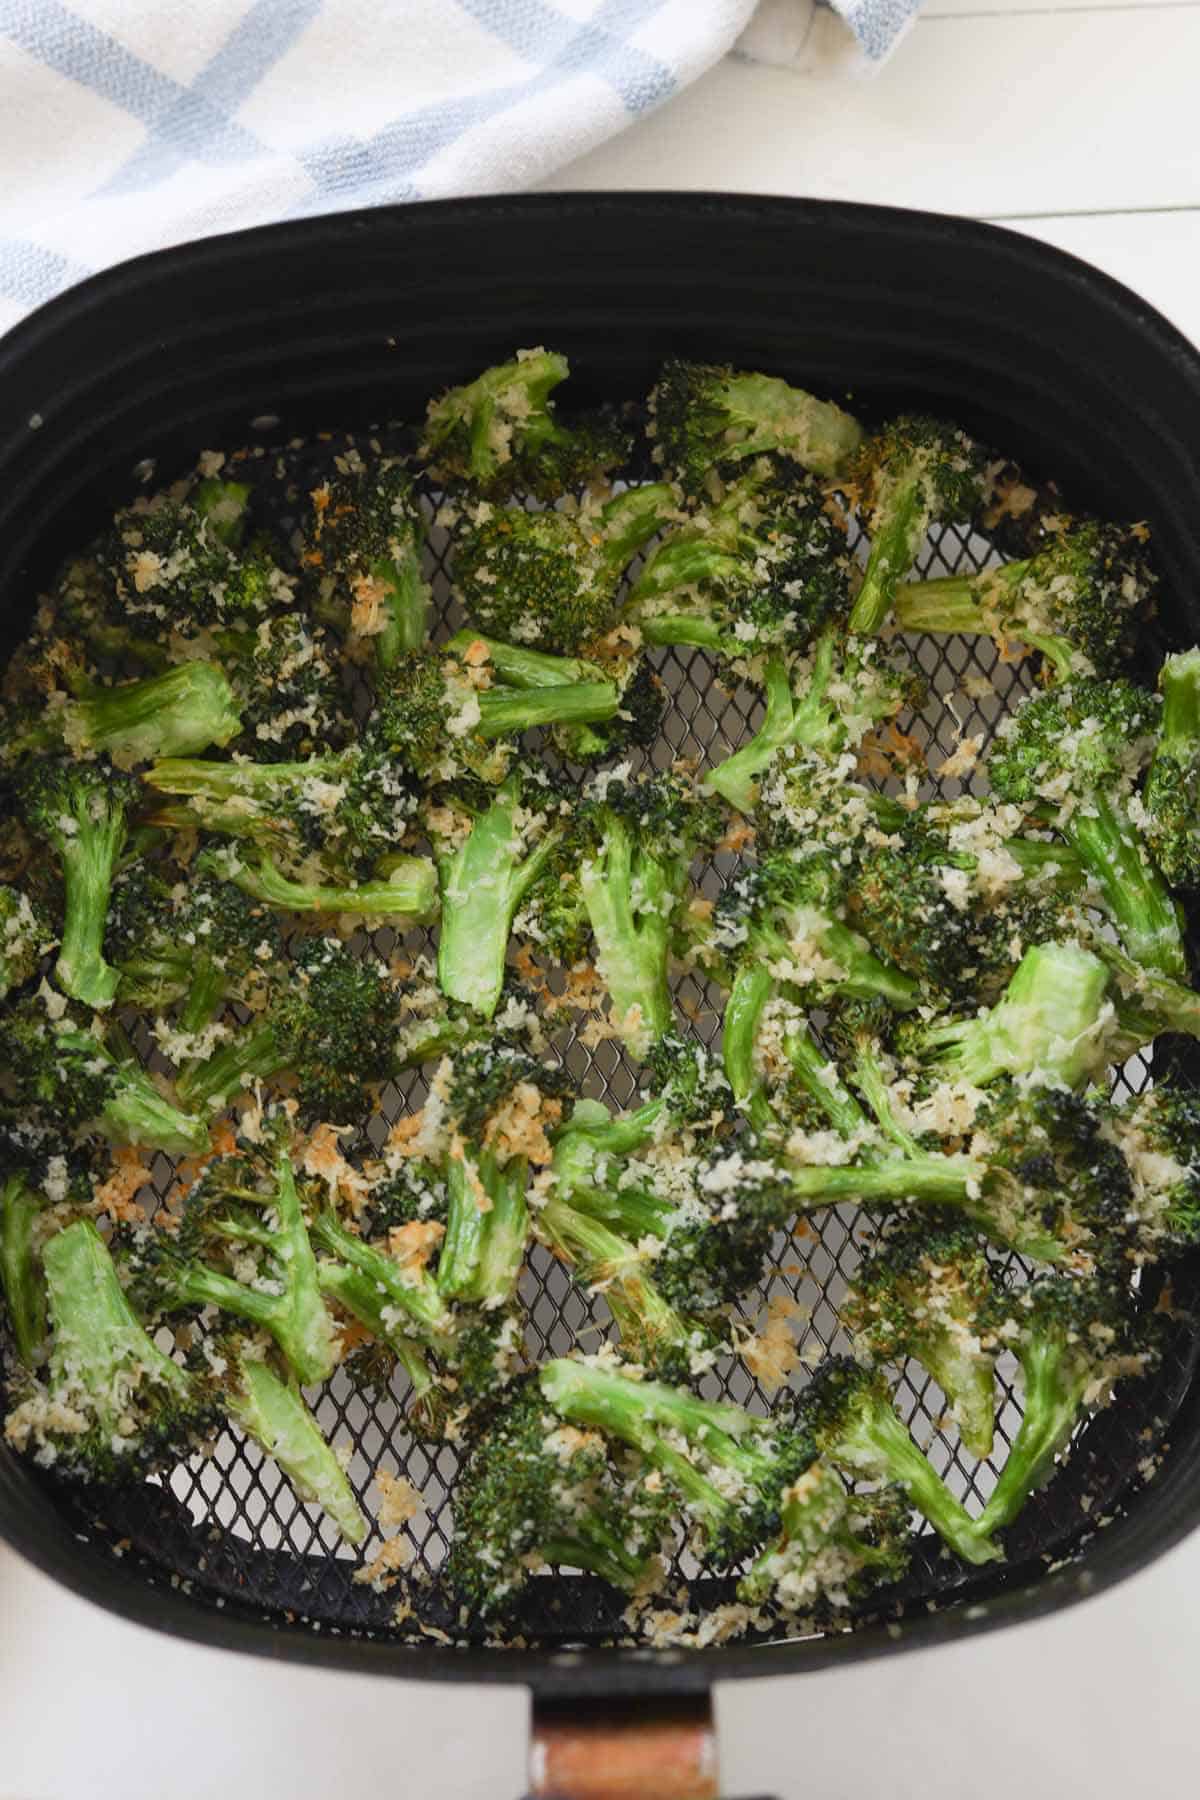 Roasted broccoli florets crusted with parmesan and panko in an air fryer basket.